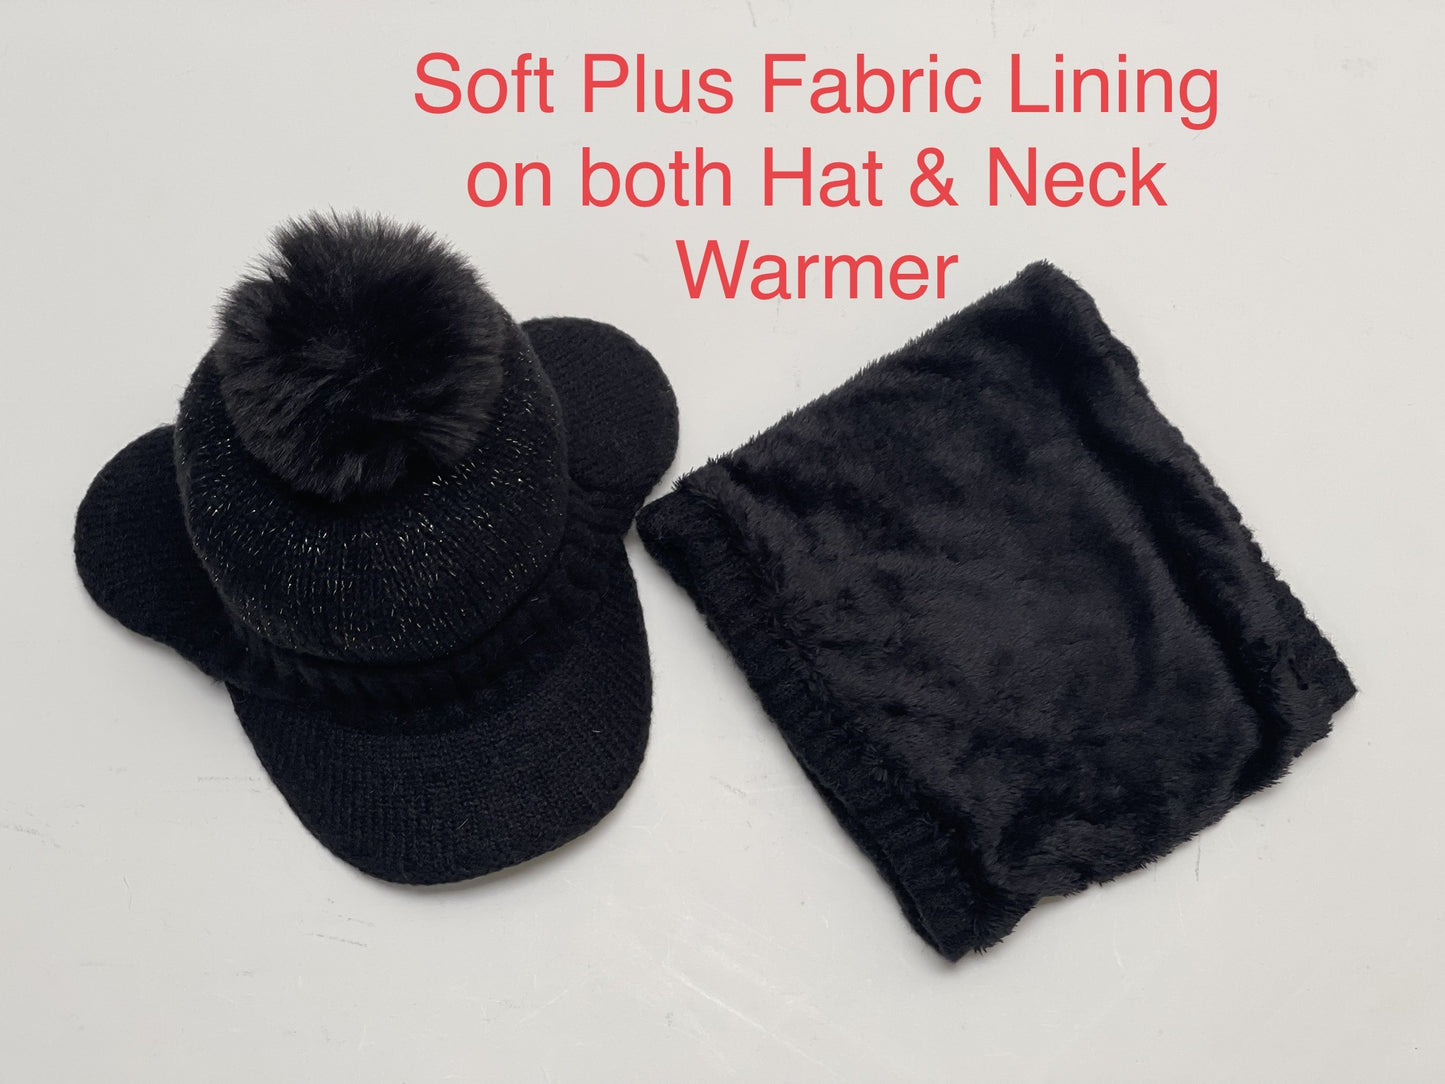 Soft Plus Fabric Lining on both hat and neck warmer